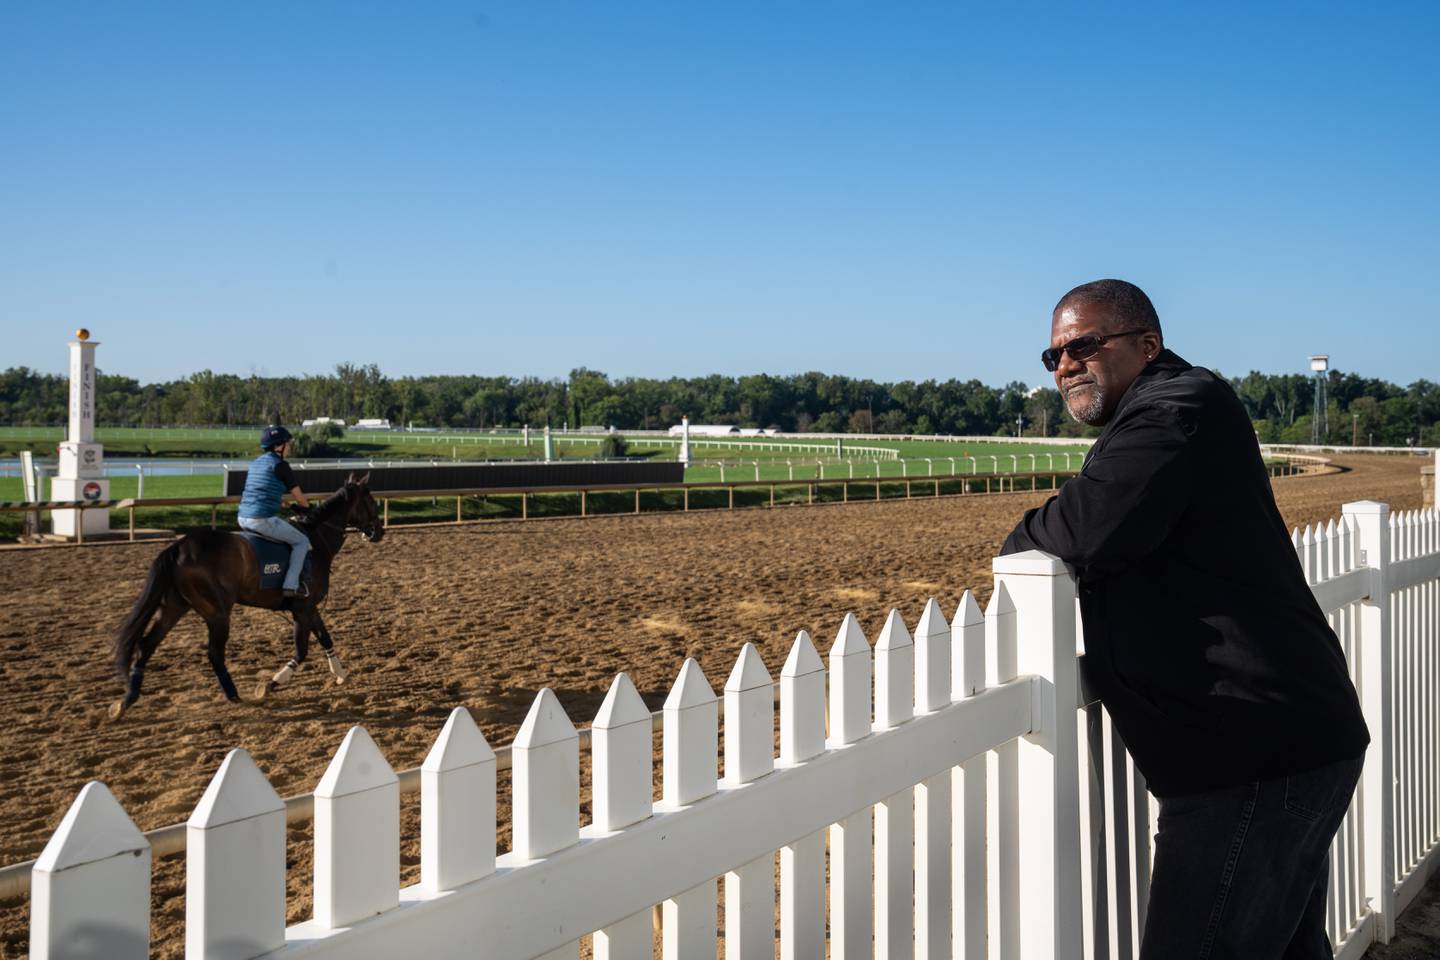 Jerome Aiken leans on a white fence as he watches jockeys and horses go by on the racetrack.